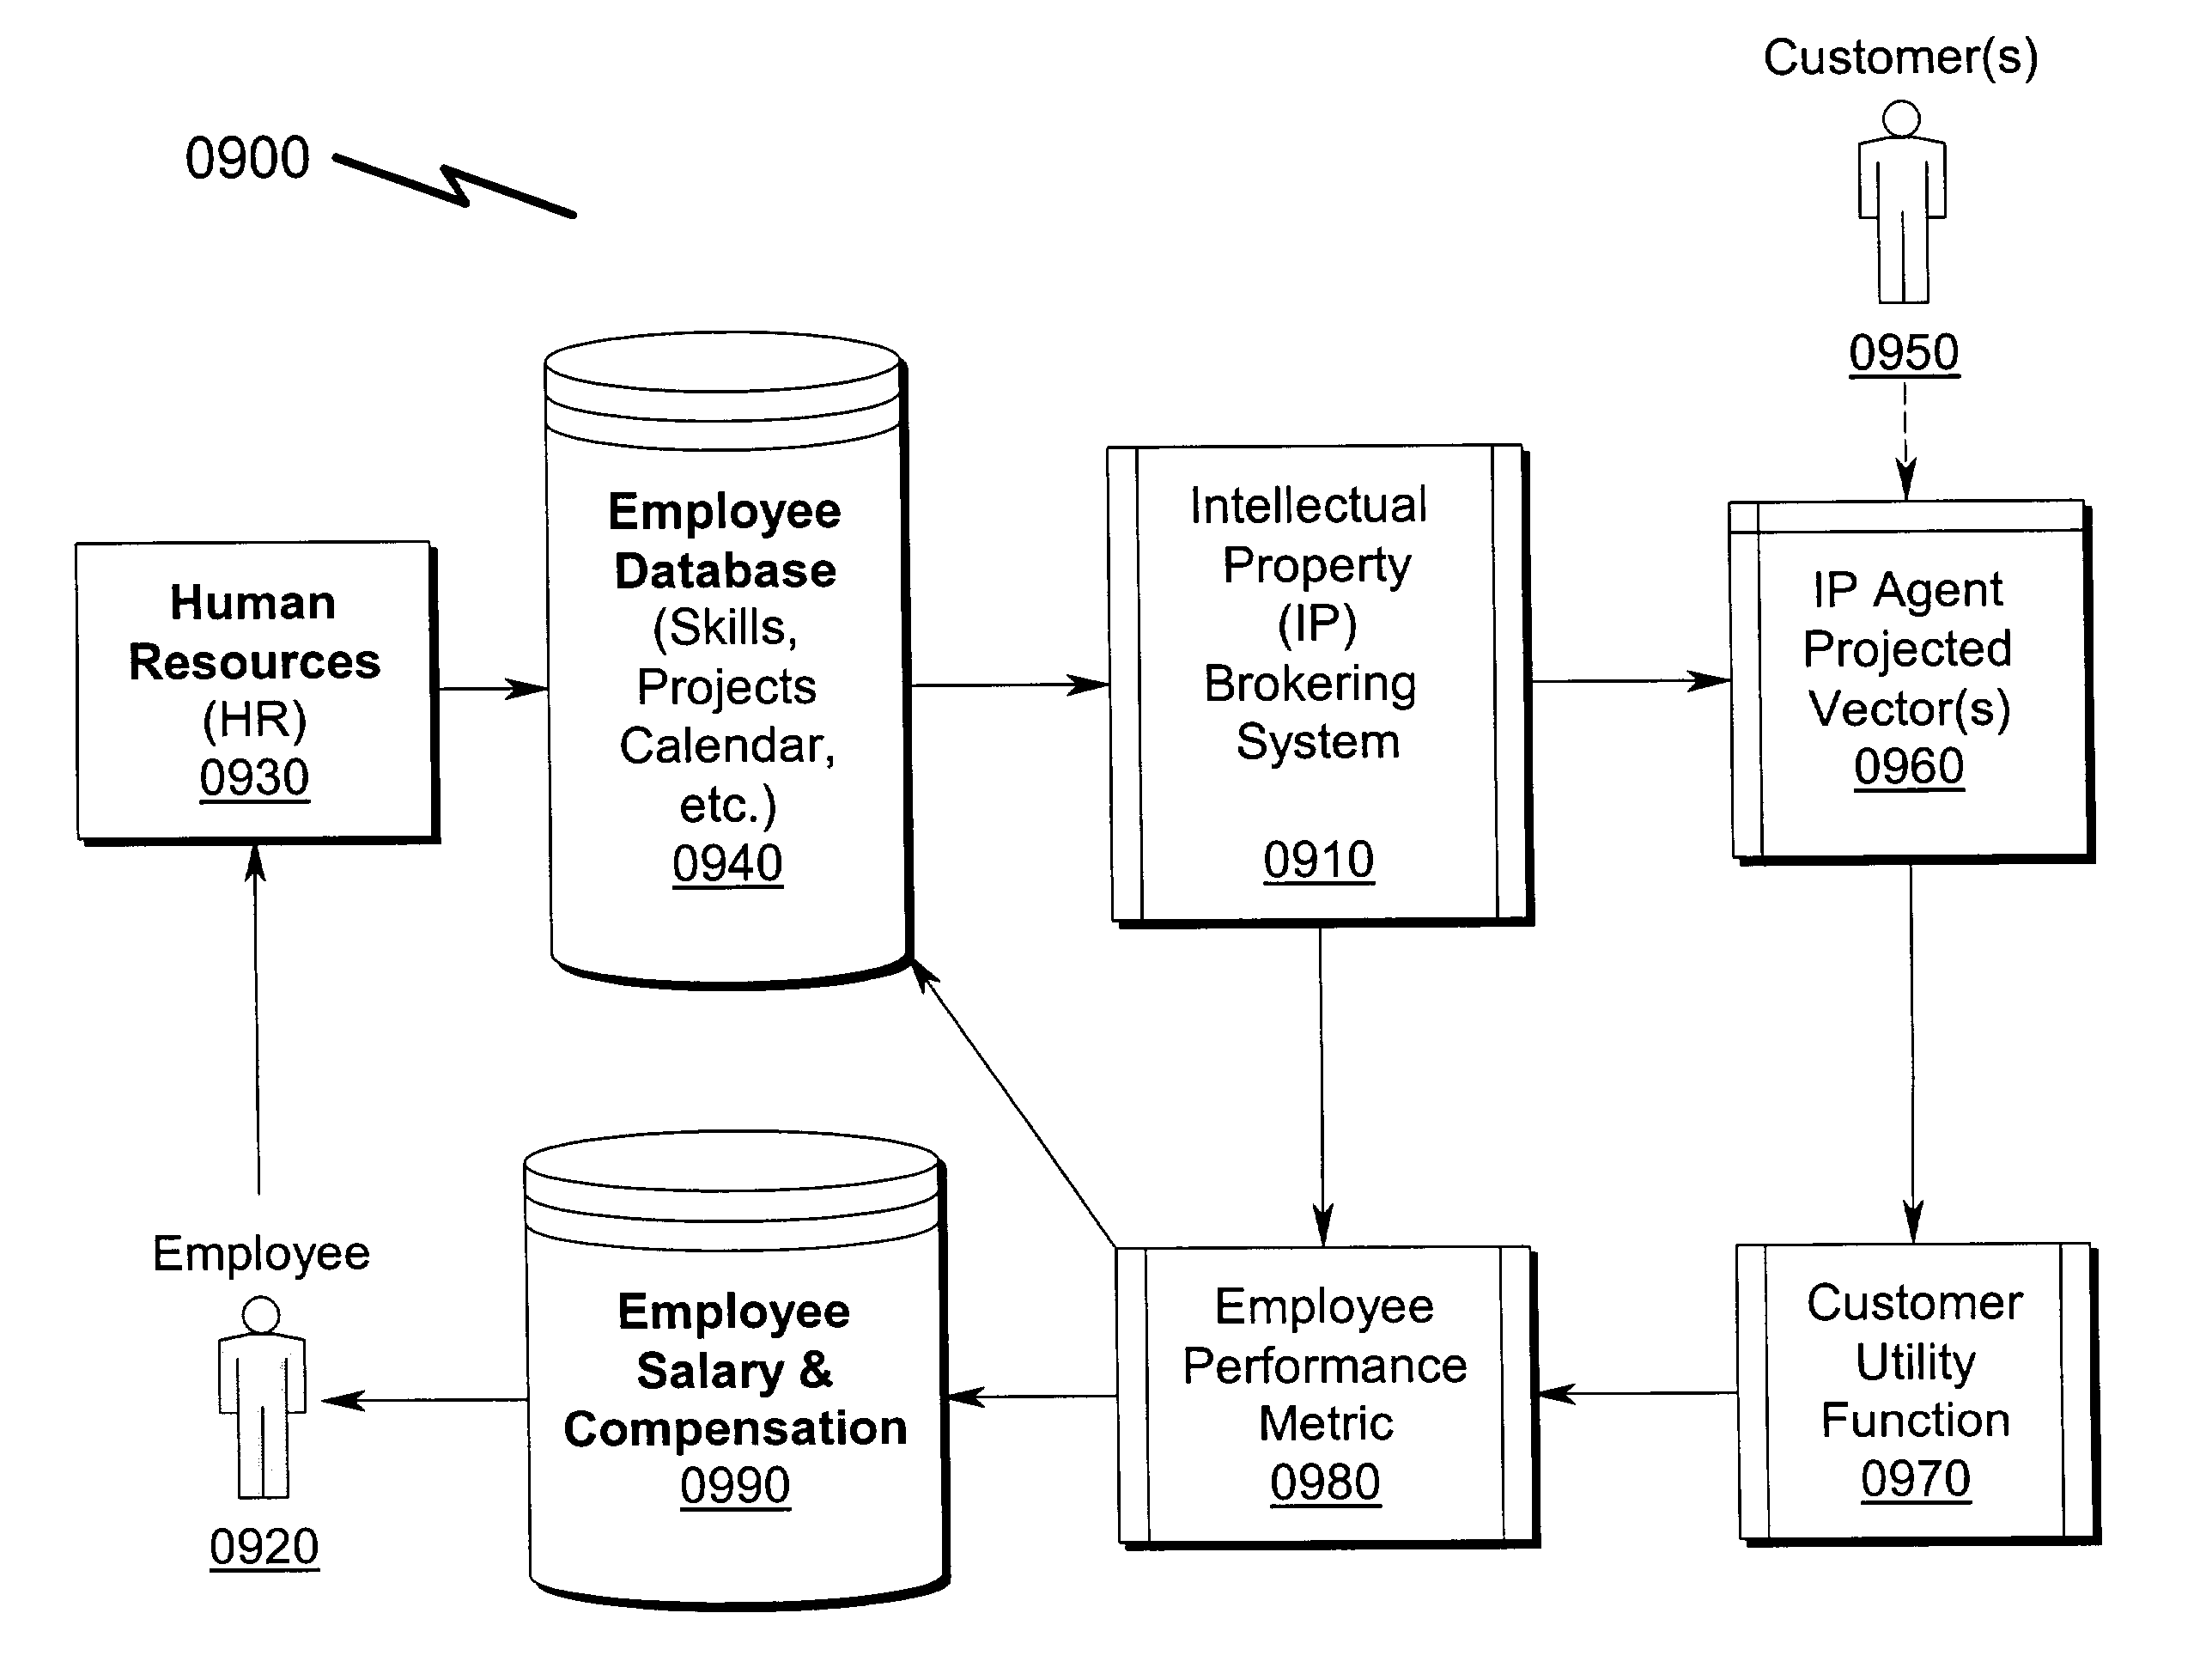 Distributed data storage system and method